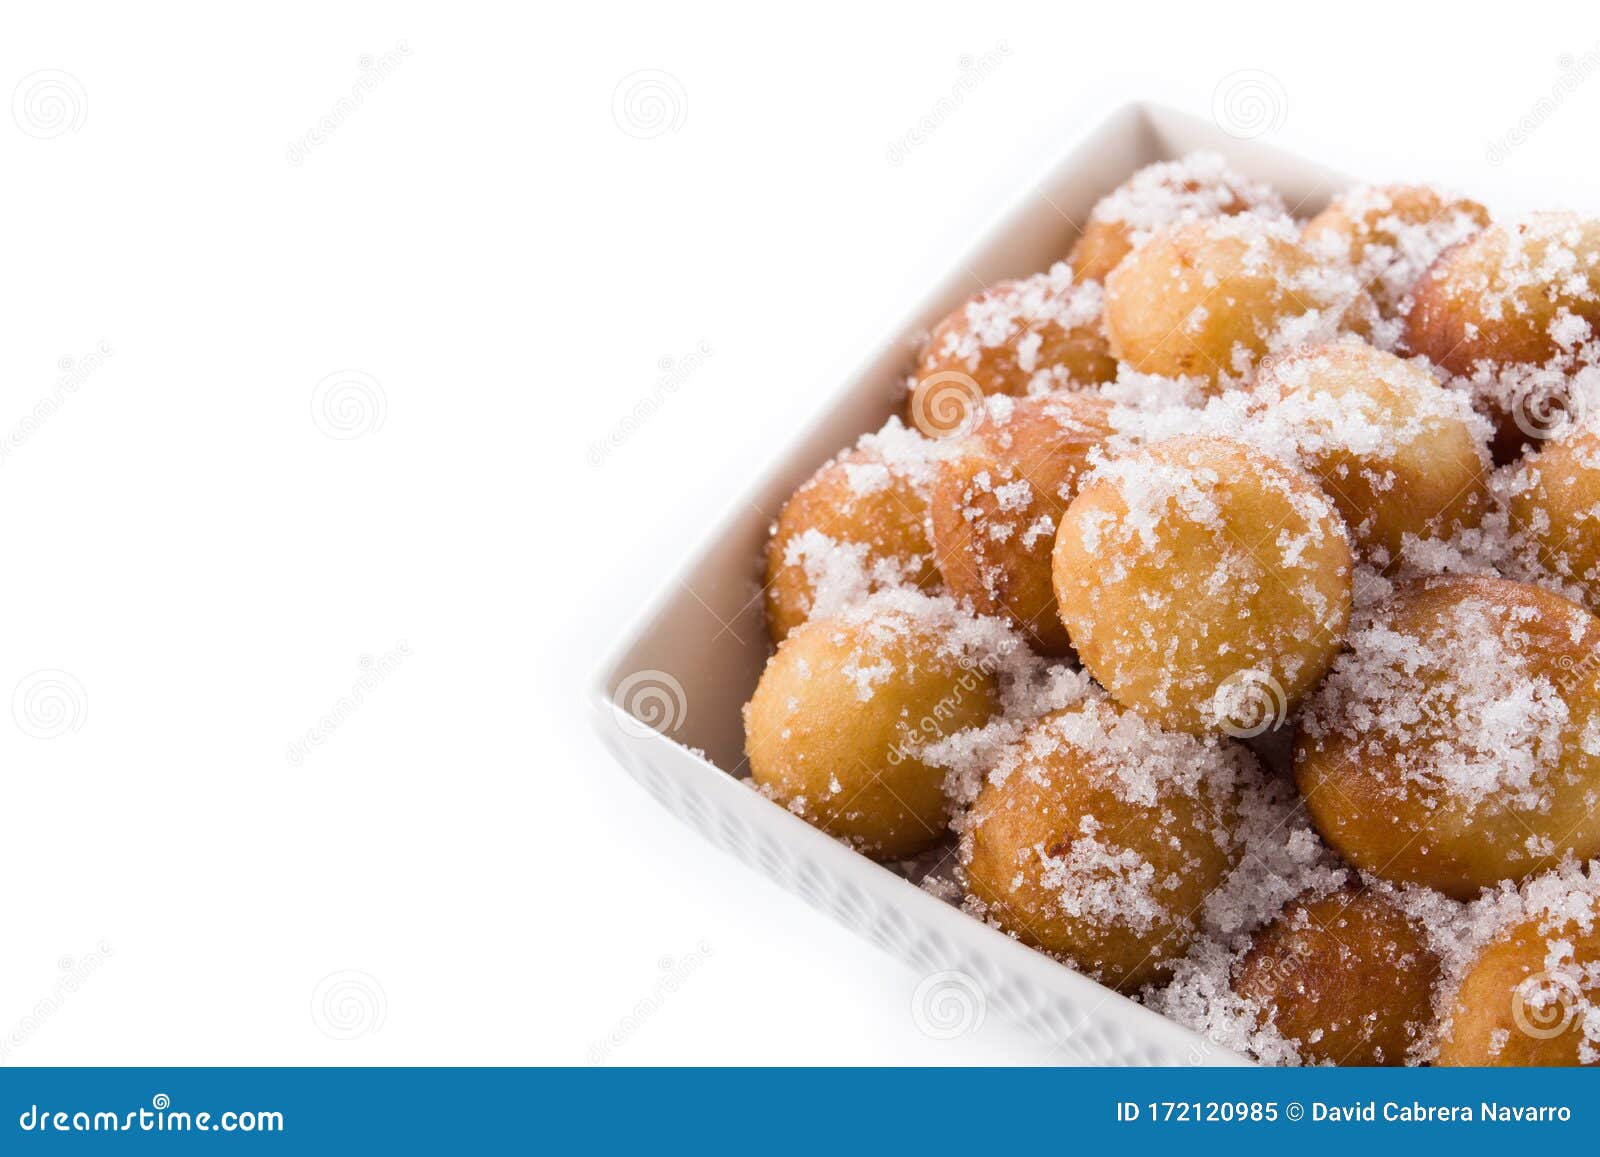 carnival fritters or buÃÂ±uelos de viento for holy week